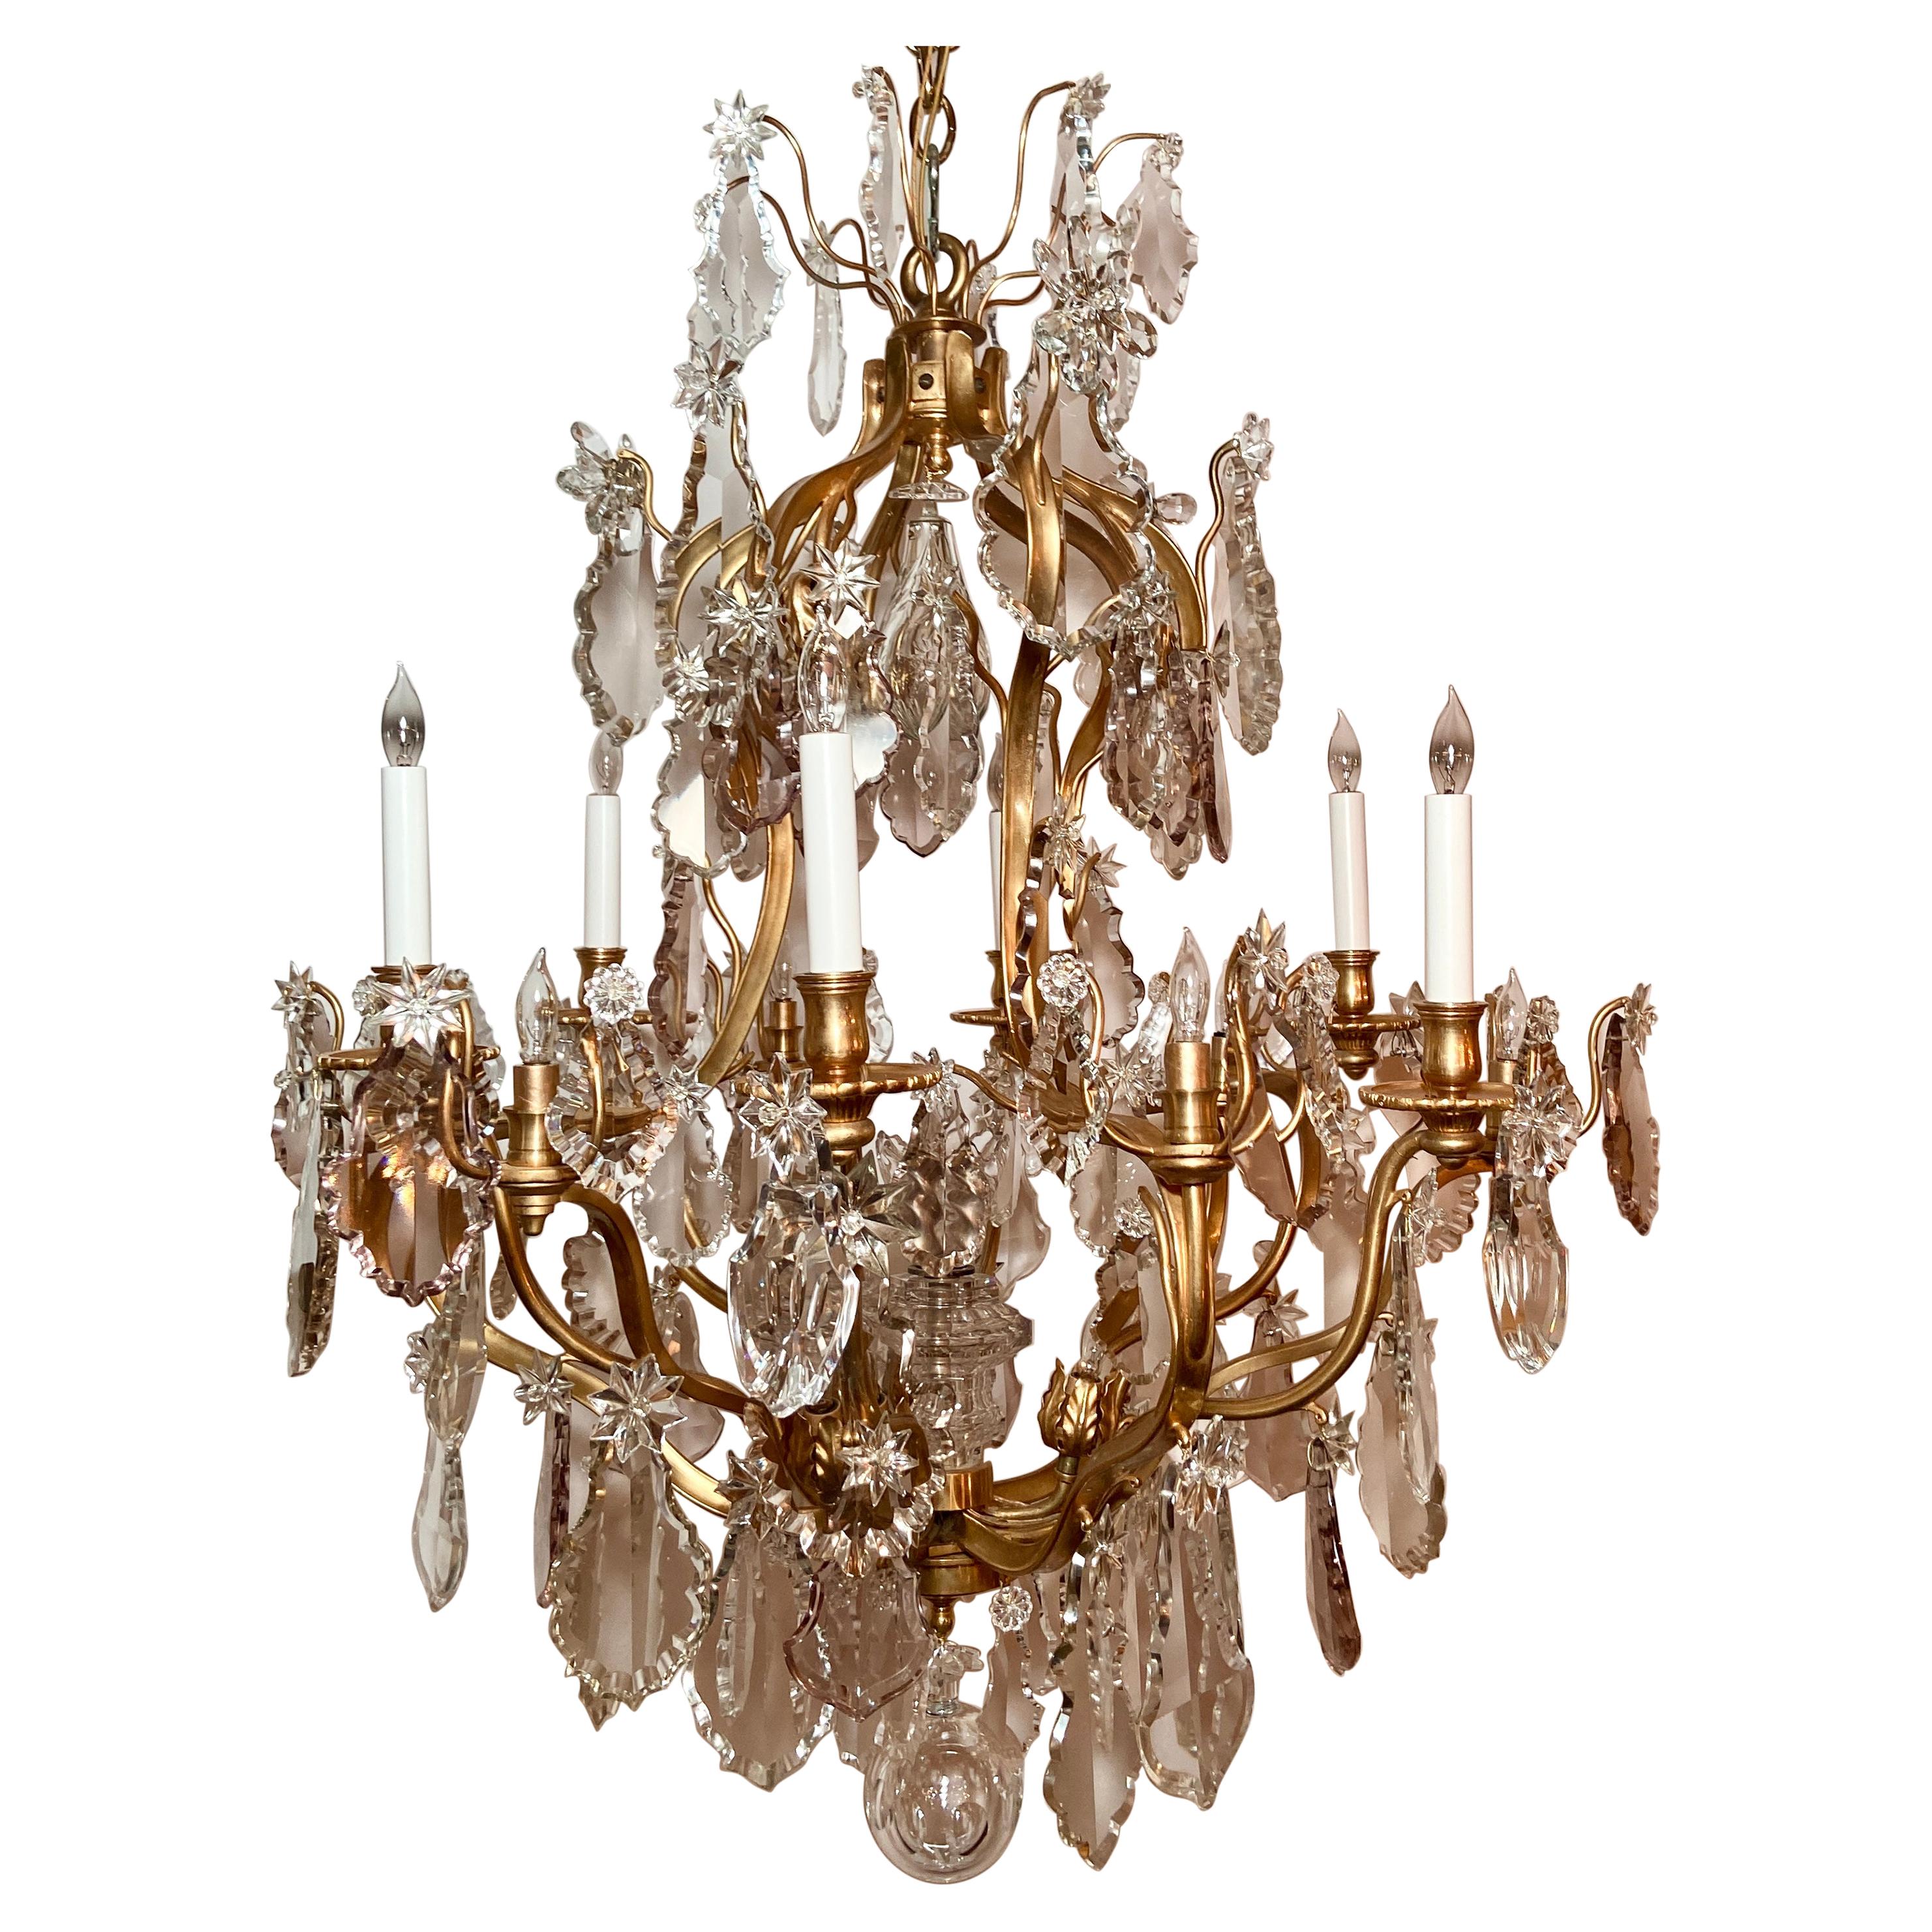 Antique French Baccarat Crystal and Gold Bronze Chandelier, Circa 1880